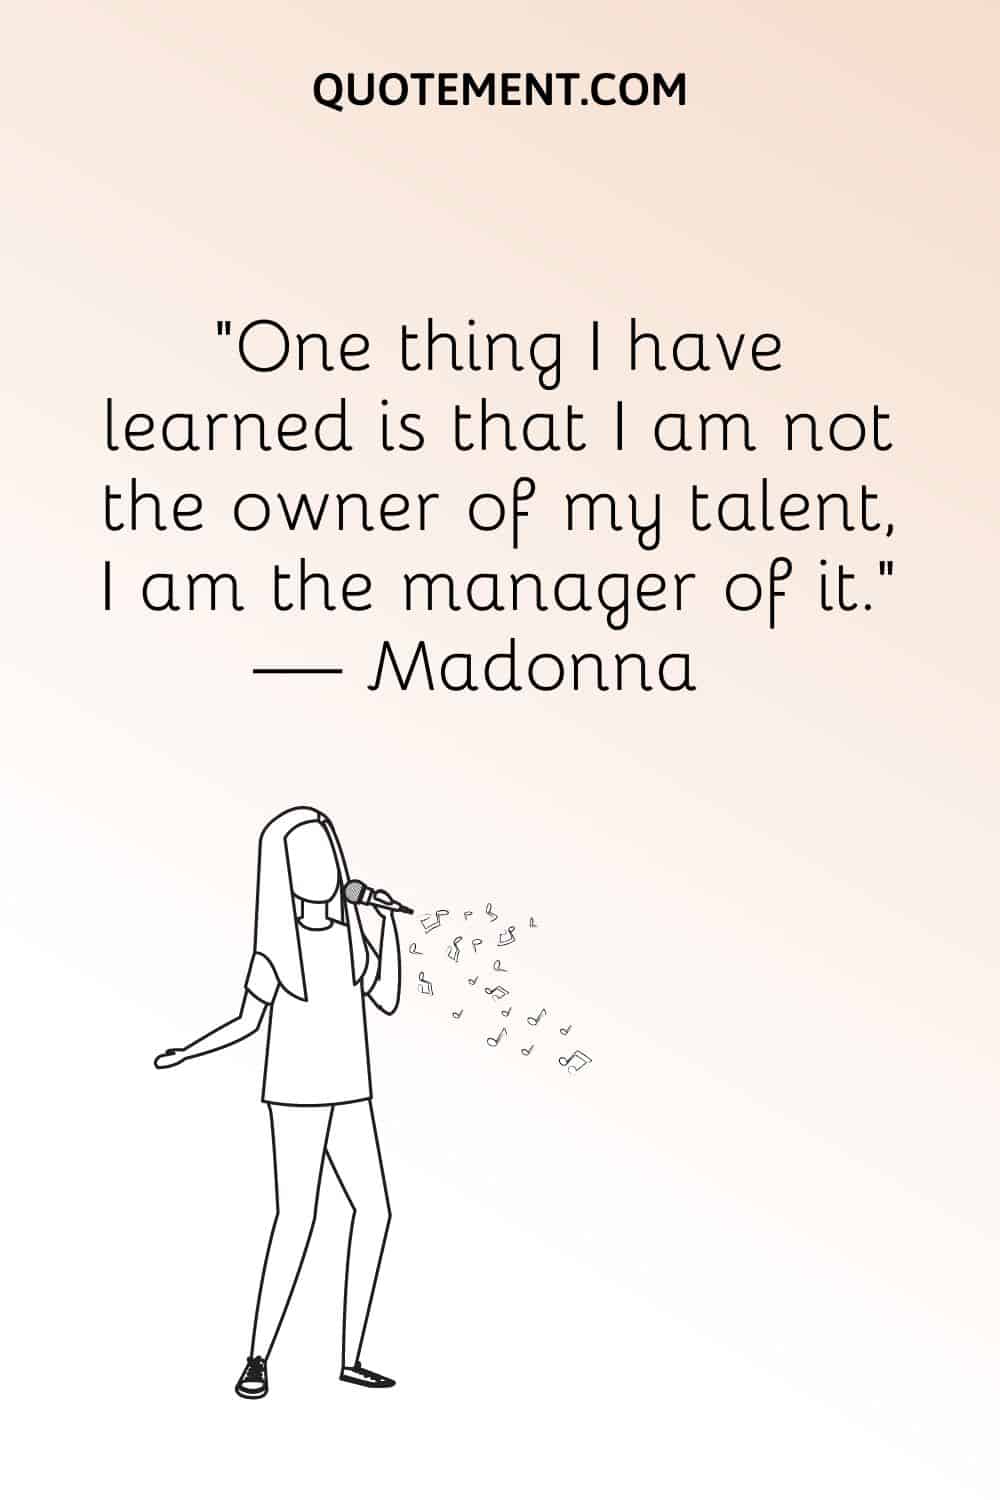 “One thing I have learned is that I am not the owner of my talent, I am the manager of it.” — Madonna